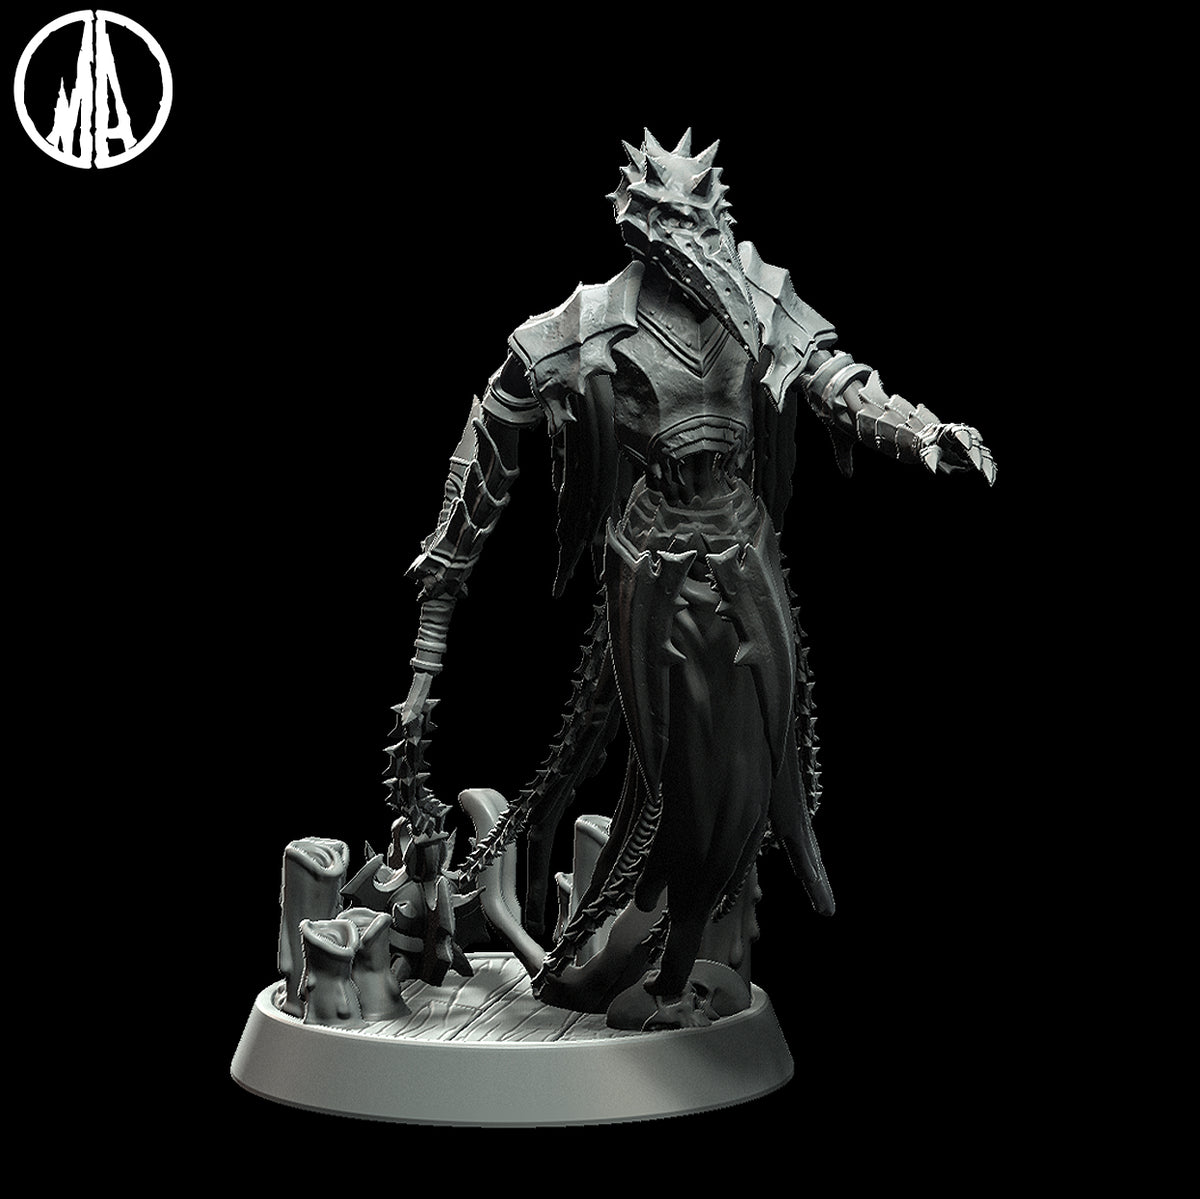 Plagued Wraith | 32mm Scale Resin Model | From the Lost Souls Collection